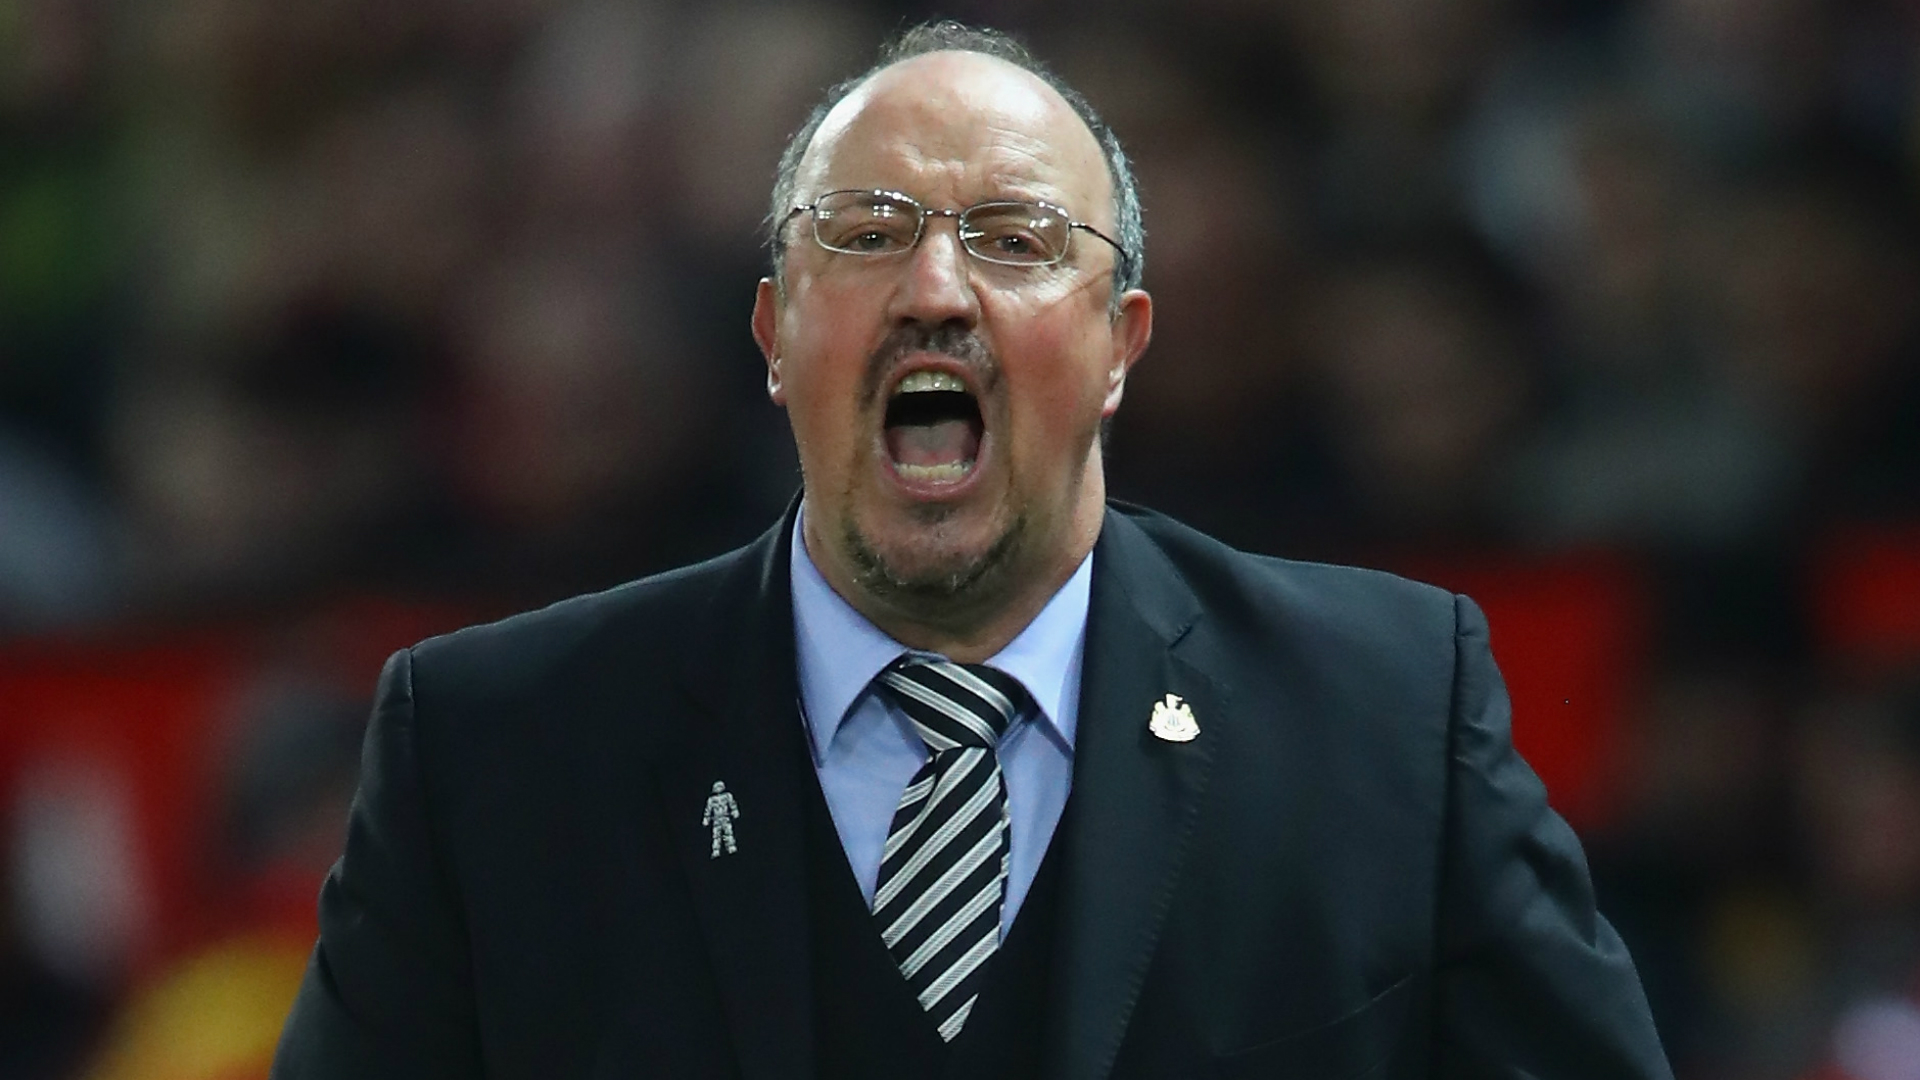 'In the future, you never know' - Benitez would be open to Everton move